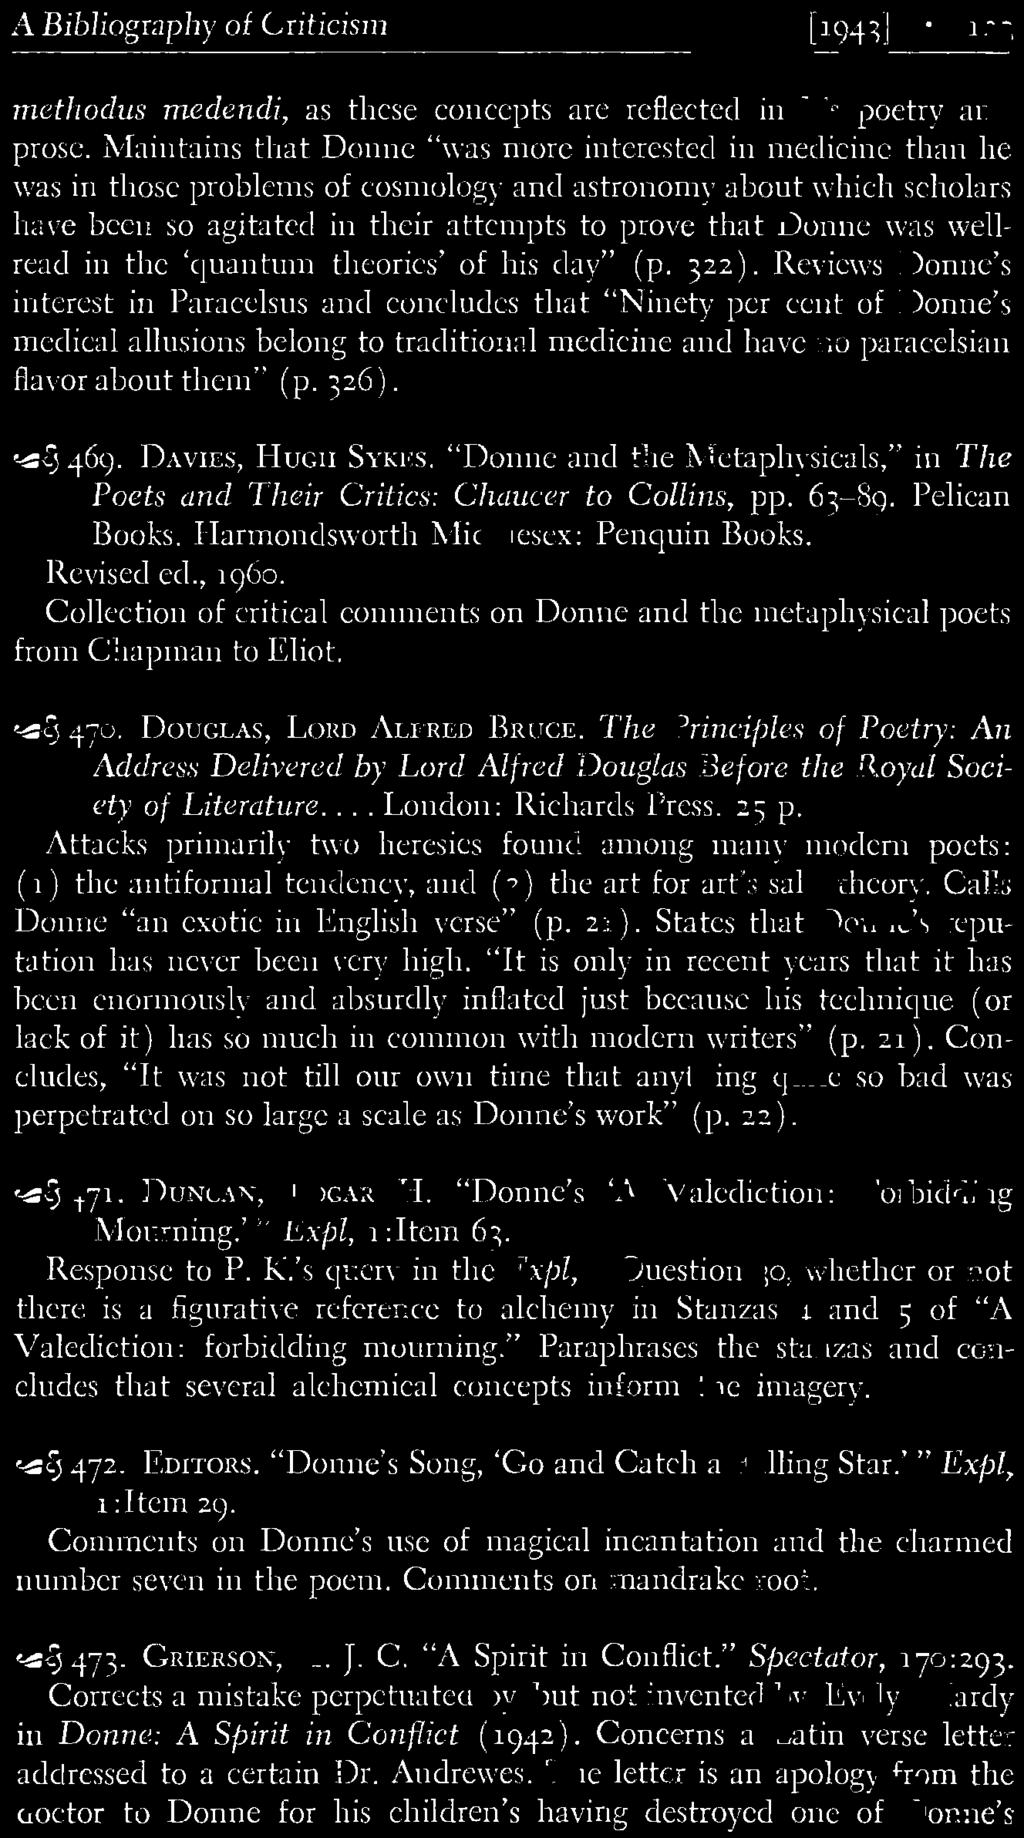 DAVIES, HUGH SYl<Es. "Donne and the Metaphysicals," in The Poets and Their Critics: Chaucer to Collins, pp. 63-89. Pelican Books. Harmondsworth Middlesex: Penquin Books. Revised ed., 1960.